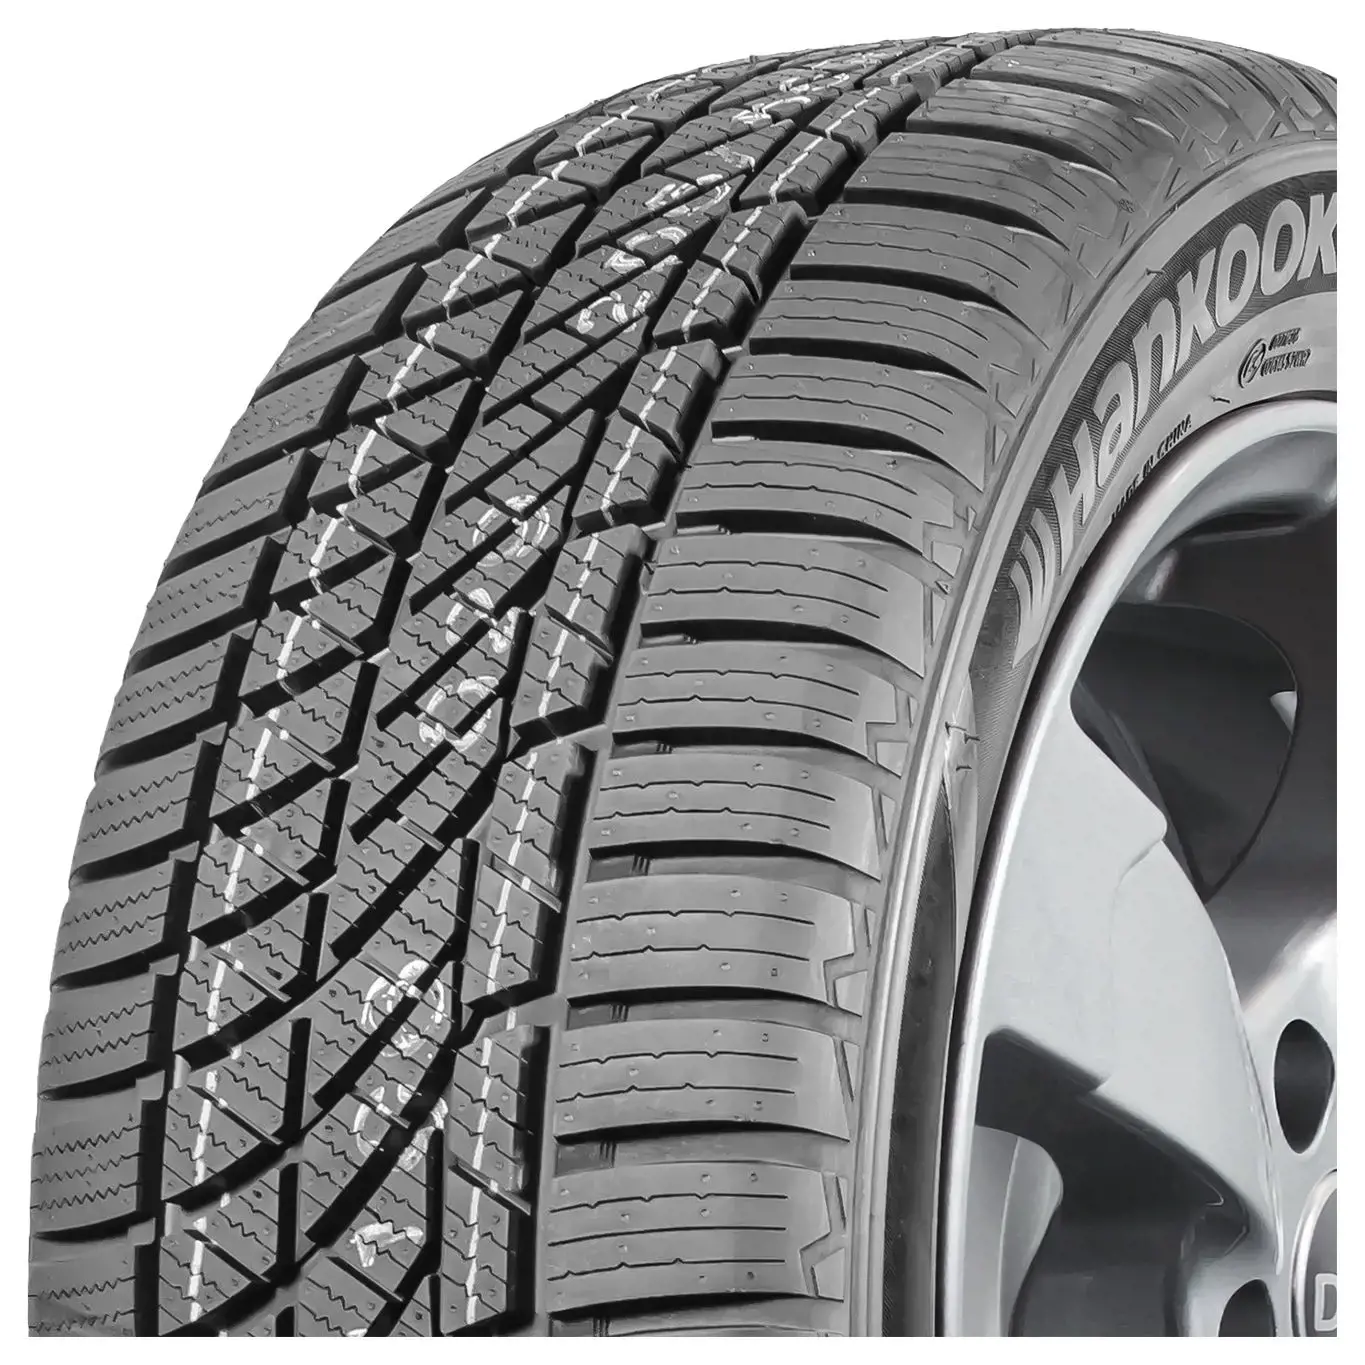 165/70 R13 83T Kinergy 4S H740 XL SP M+S